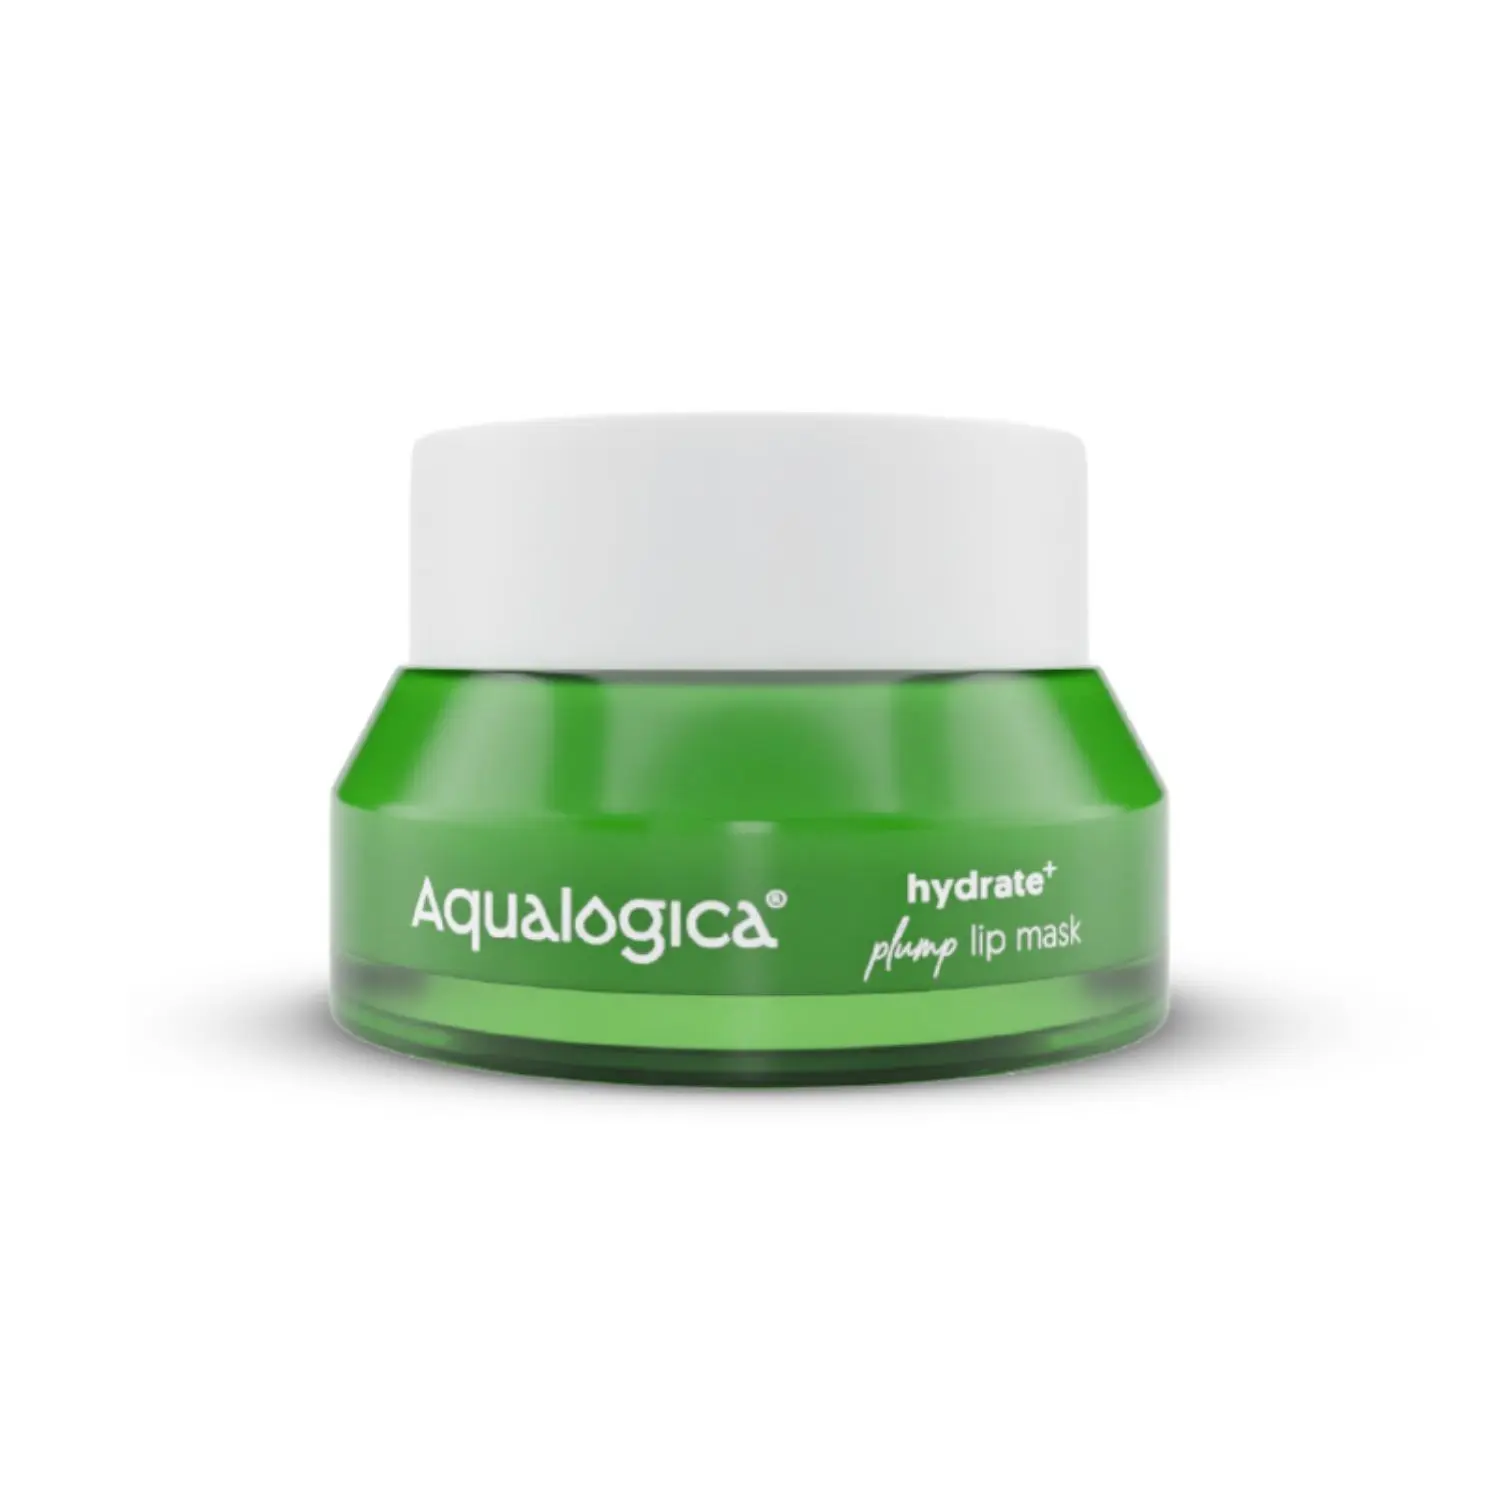 Aqualogica Hydrate+ Plump Lip Mask with Coconut water and Hyaluronic Acid 15g